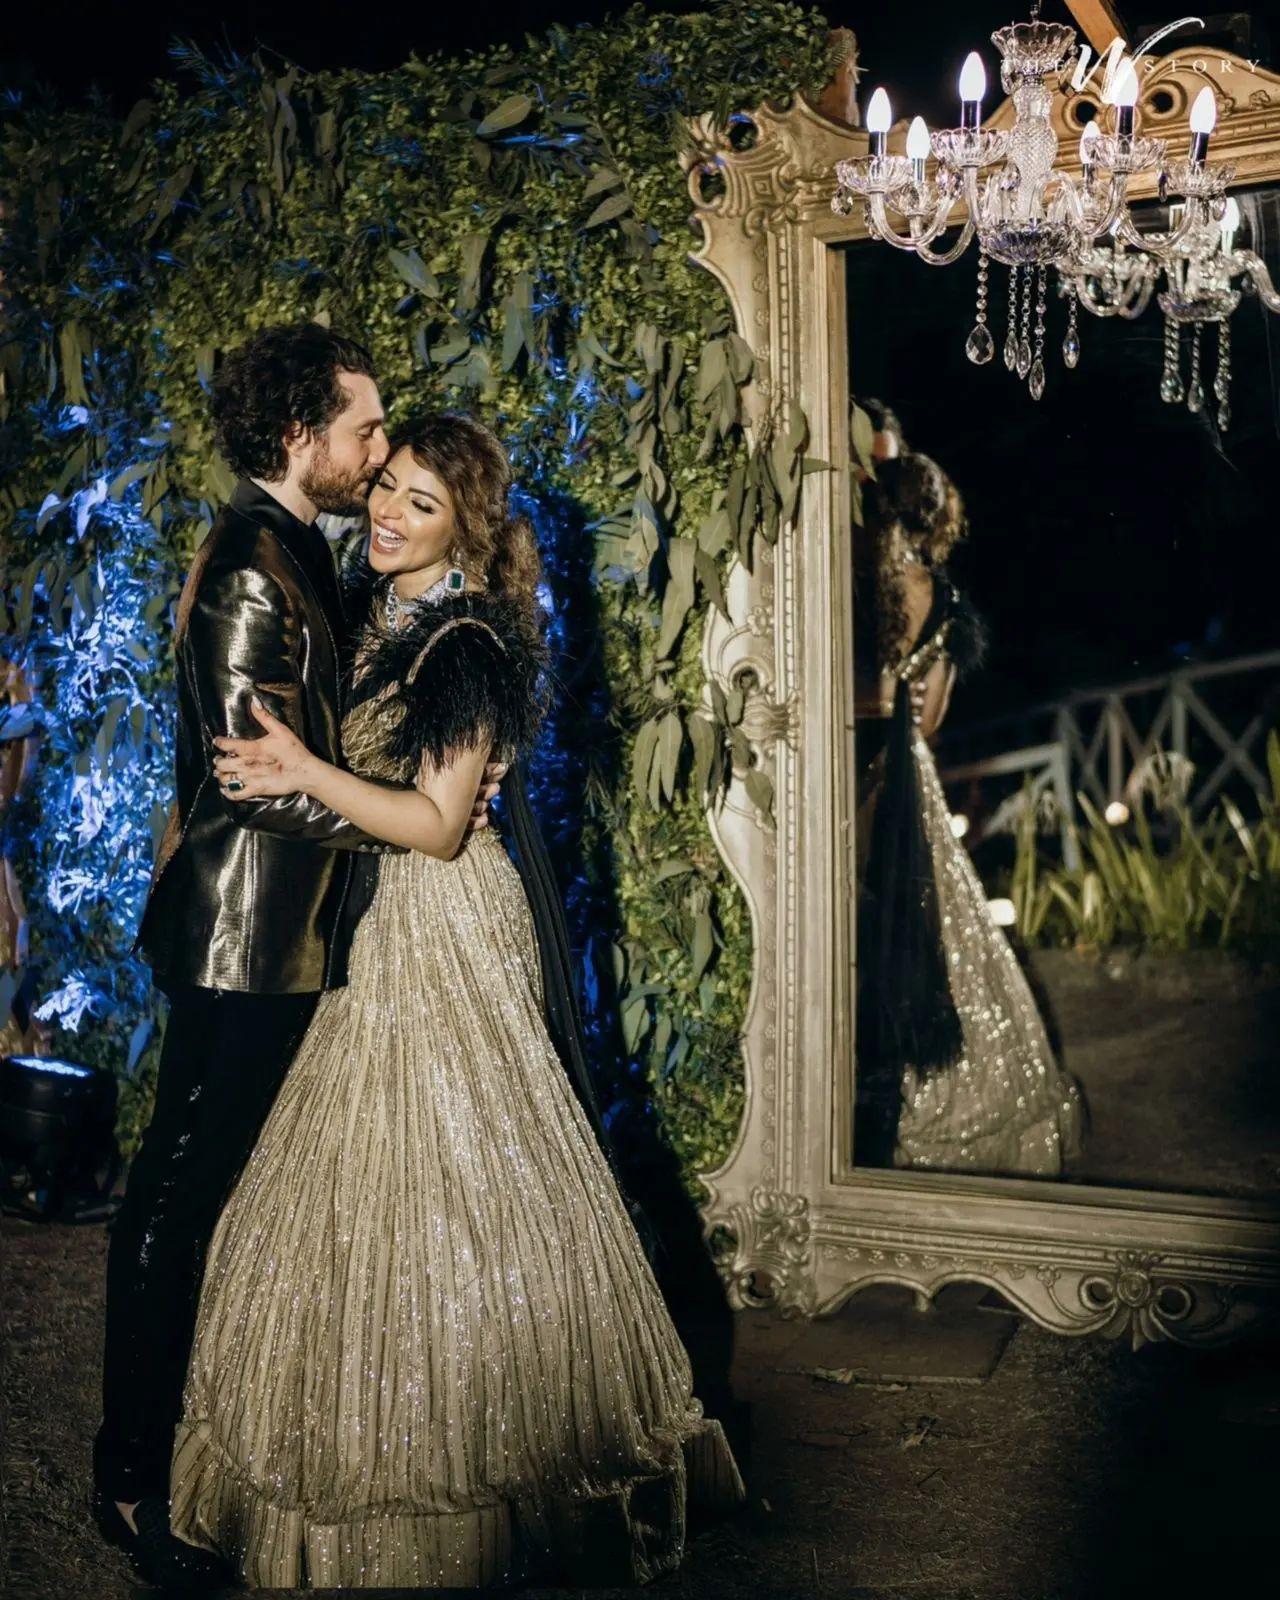 After the wedding, they also hosted a fairytale reception, where Shama Sikander was seen wearing a black and golden gown. The groom complimented Shama's look with a velvet black tuxedo.